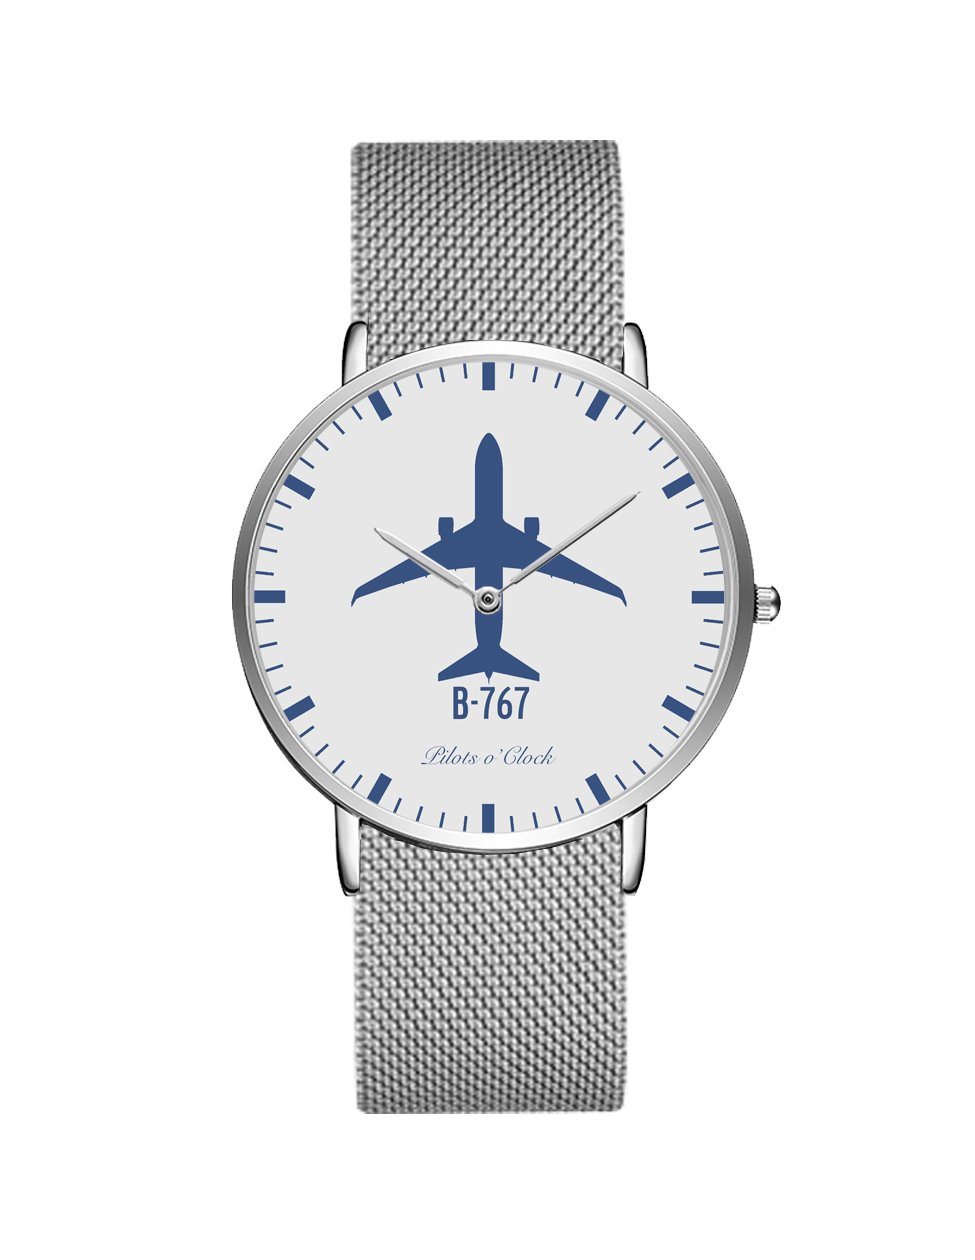 Boeing 767 Stainless Steel Strap Watches Pilot Eyes Store Silver & Black Stainless Steel Strap 